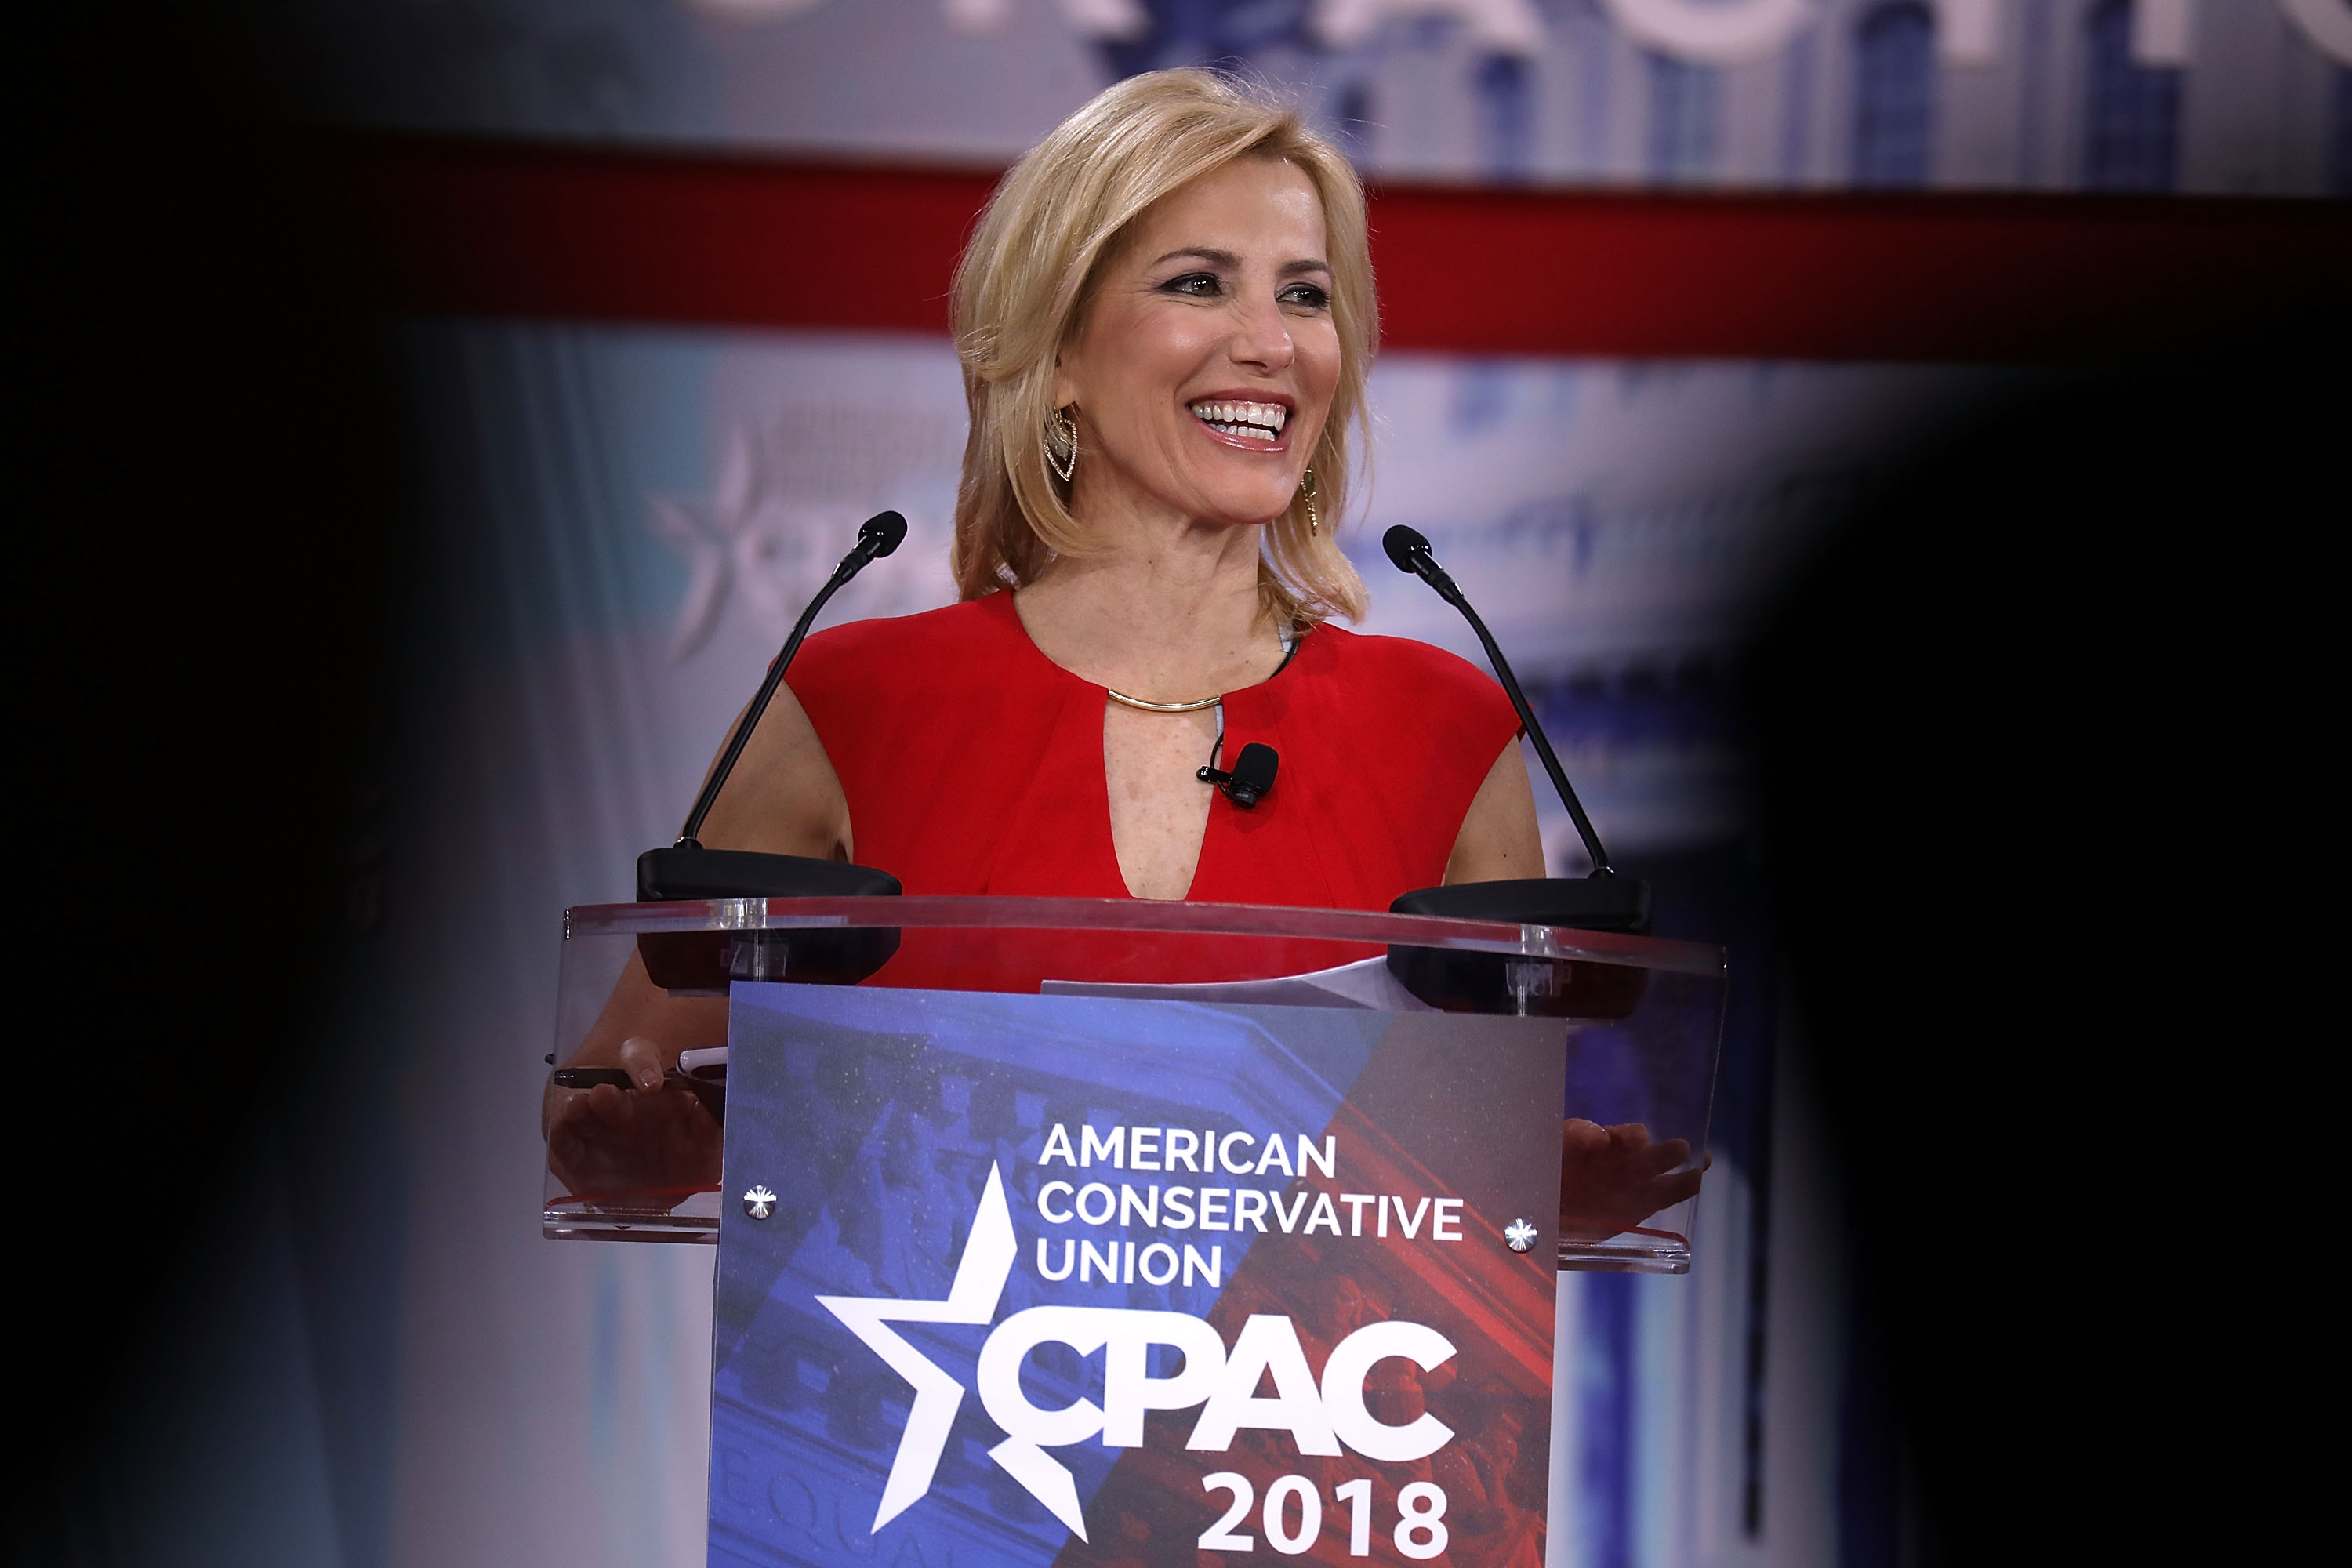 NATIONAL HARBOR, MD - FEBRUARY 23: Fox News Channel host Laura Ingraham addresses the Conservative Political Action Conference at the Gaylord National Resort and Convention Center February 23, 2018 in National Harbor, Maryland. U.S. President Donald Trump is scheduled to address CPAC, the largest annual gathering of conservatives in the nation. (Photo by Chip Somodevilla/Getty Images)